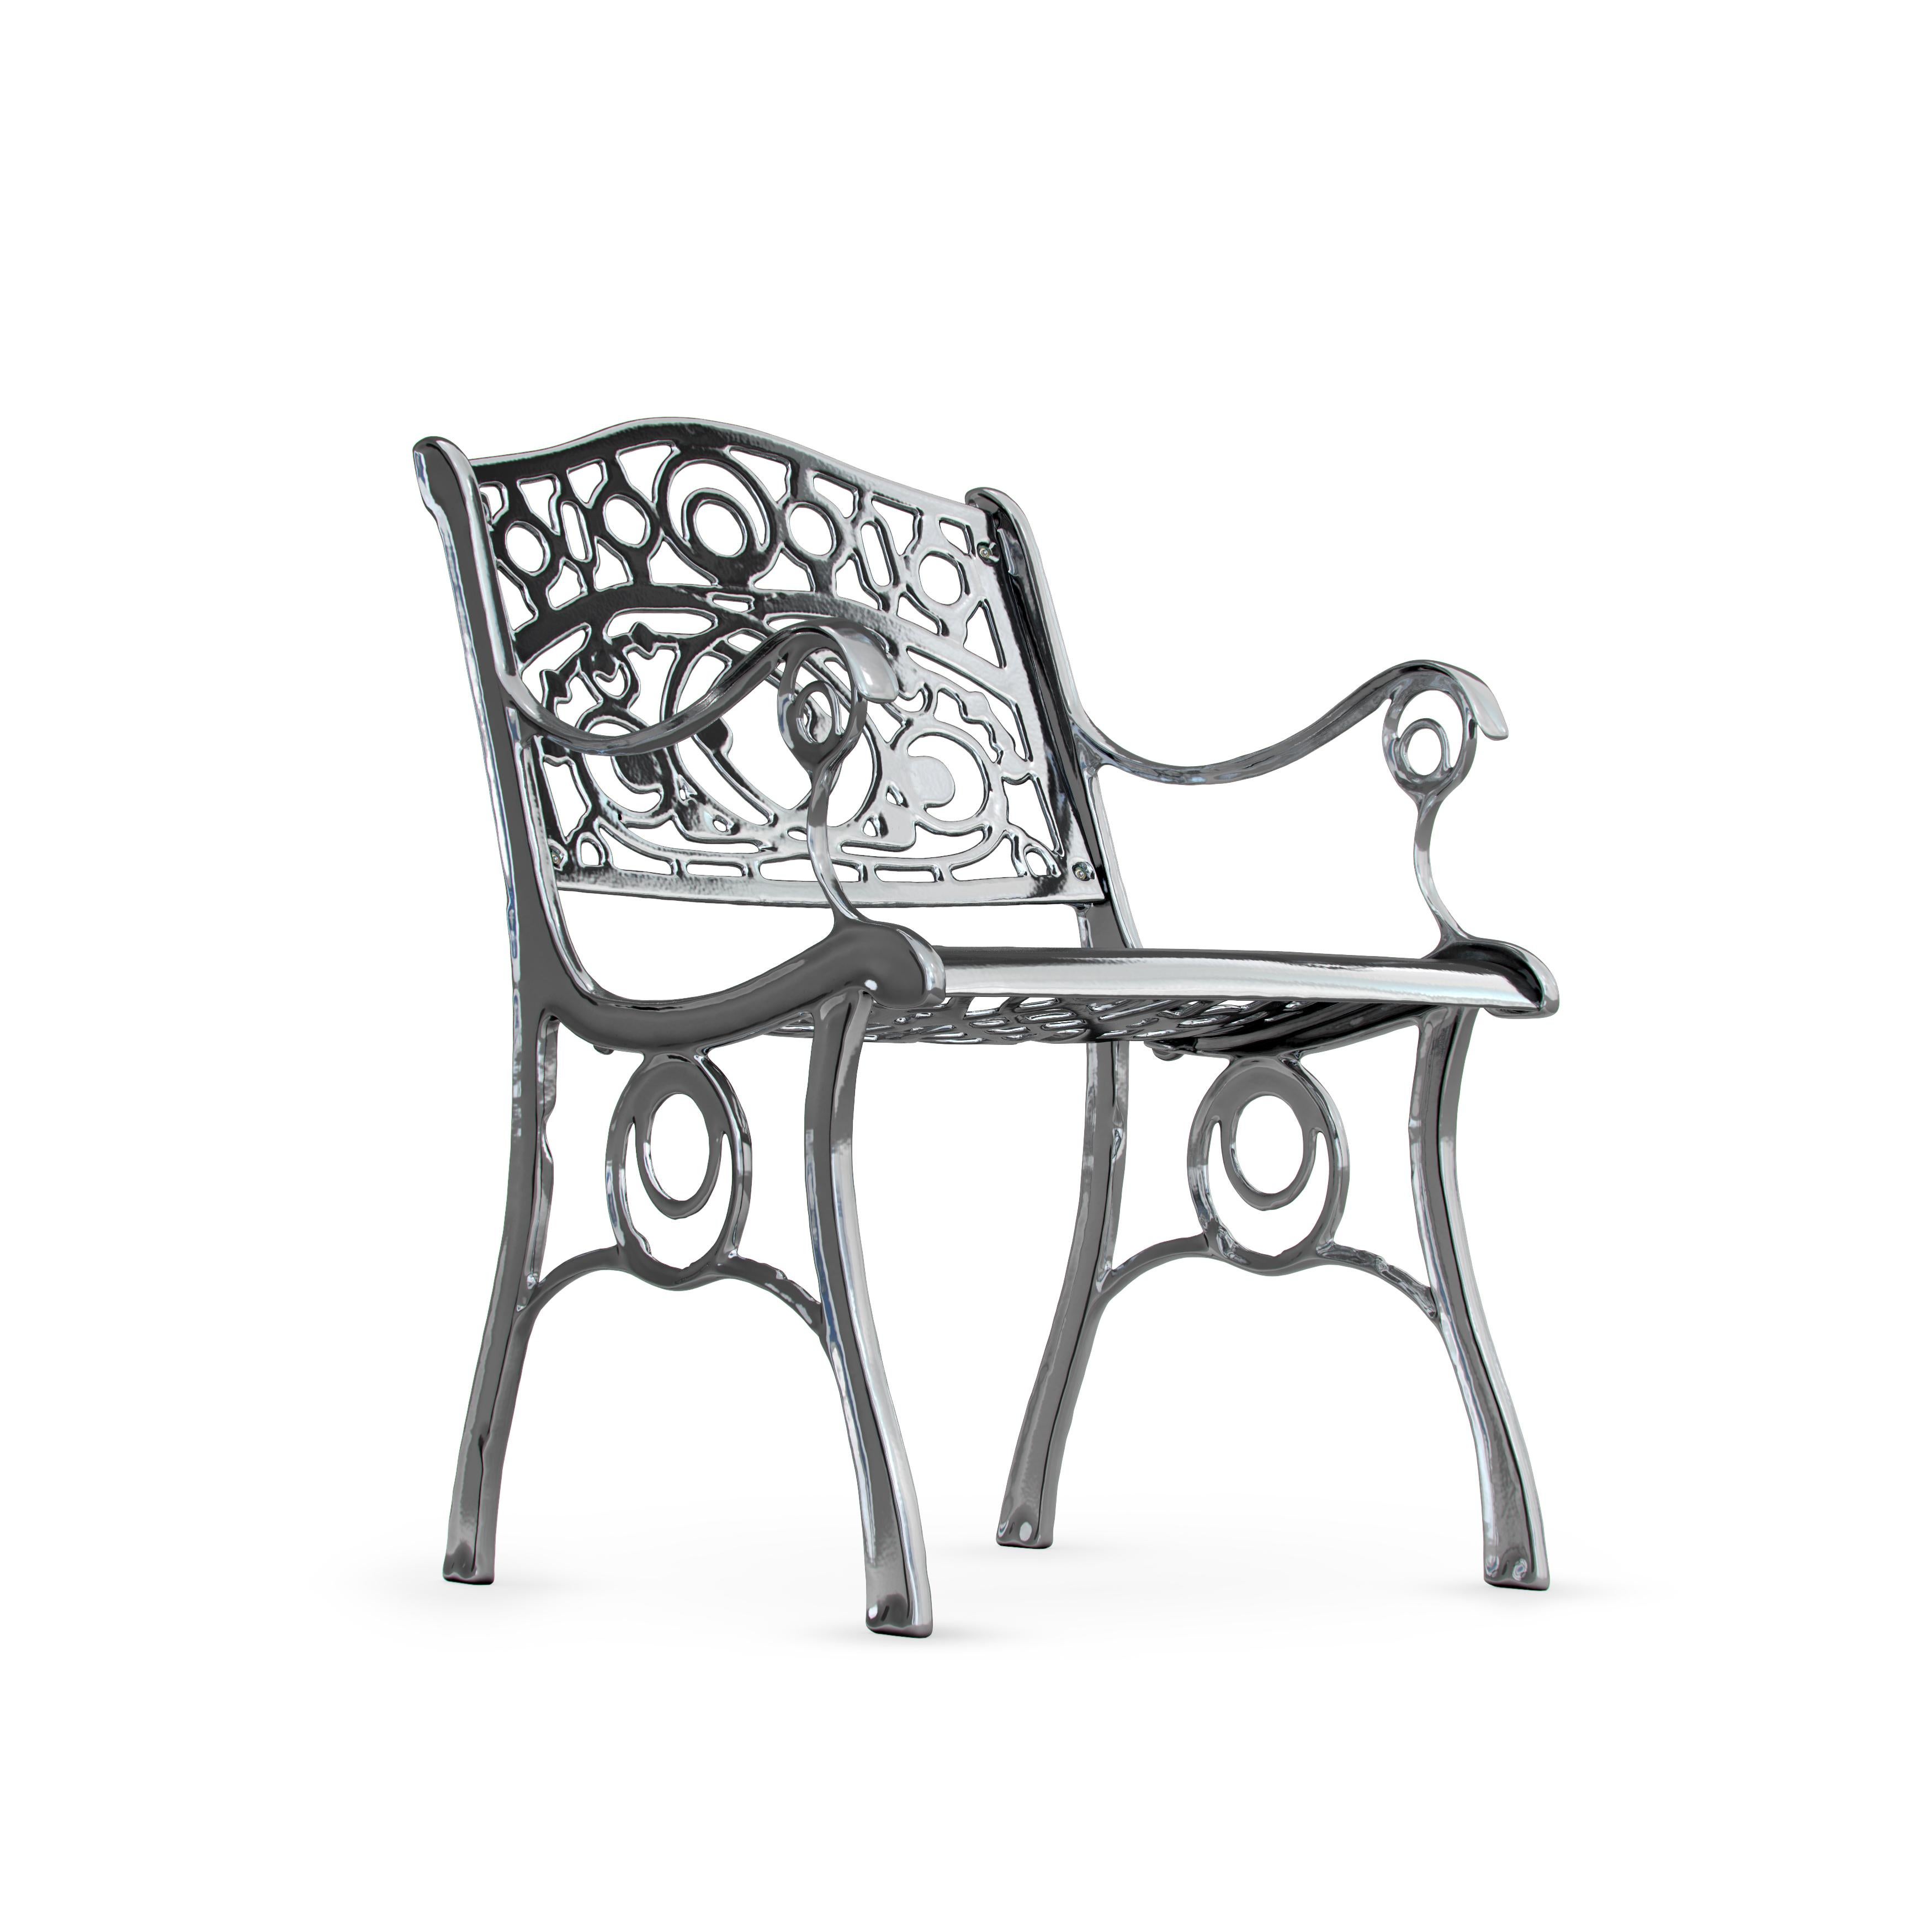 Italian Agatha, Outdoor Aluminum Armchair with Chrome Finish, Made in Italy For Sale